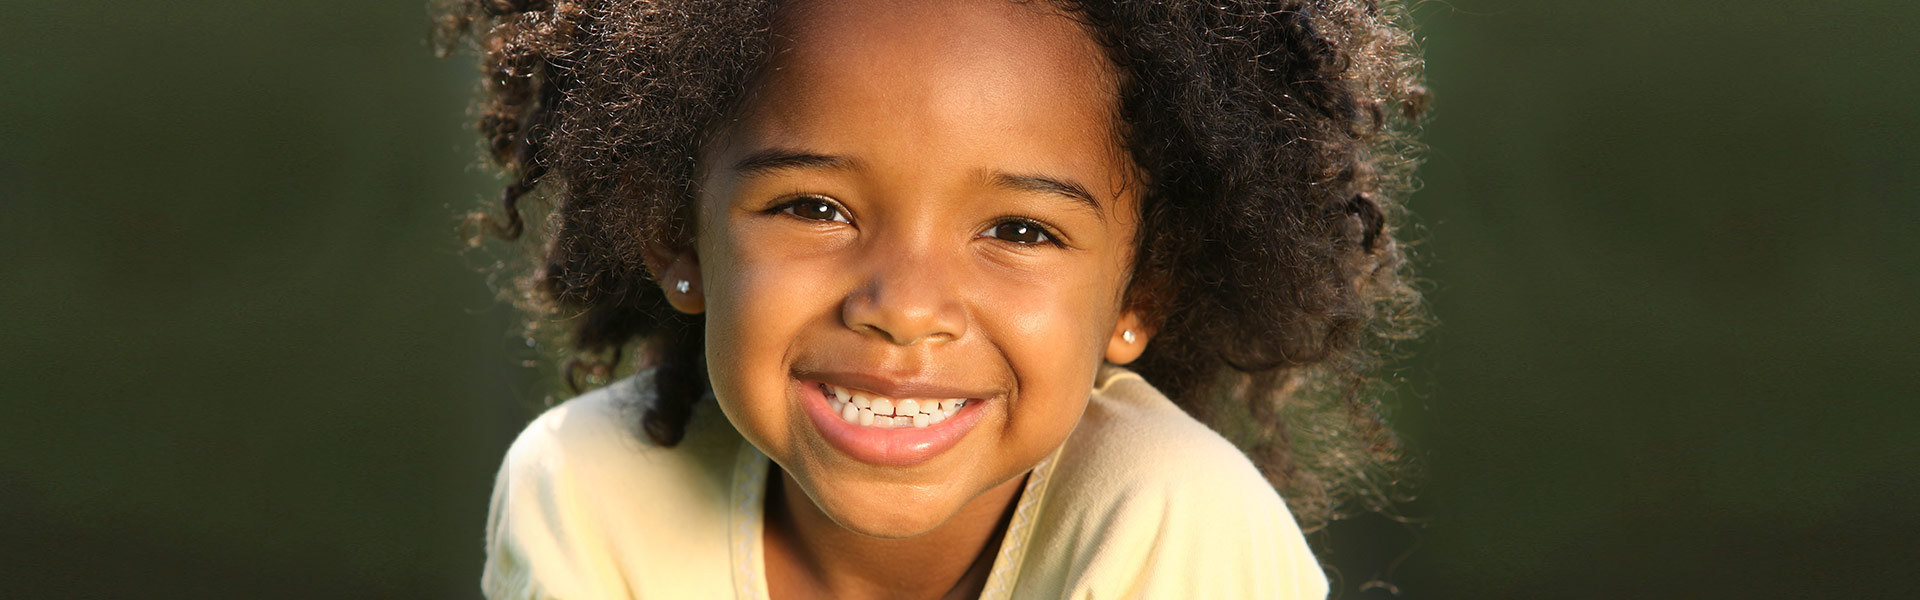 Tips for Your Kids’ Teeth from a Pediatric Dentist 